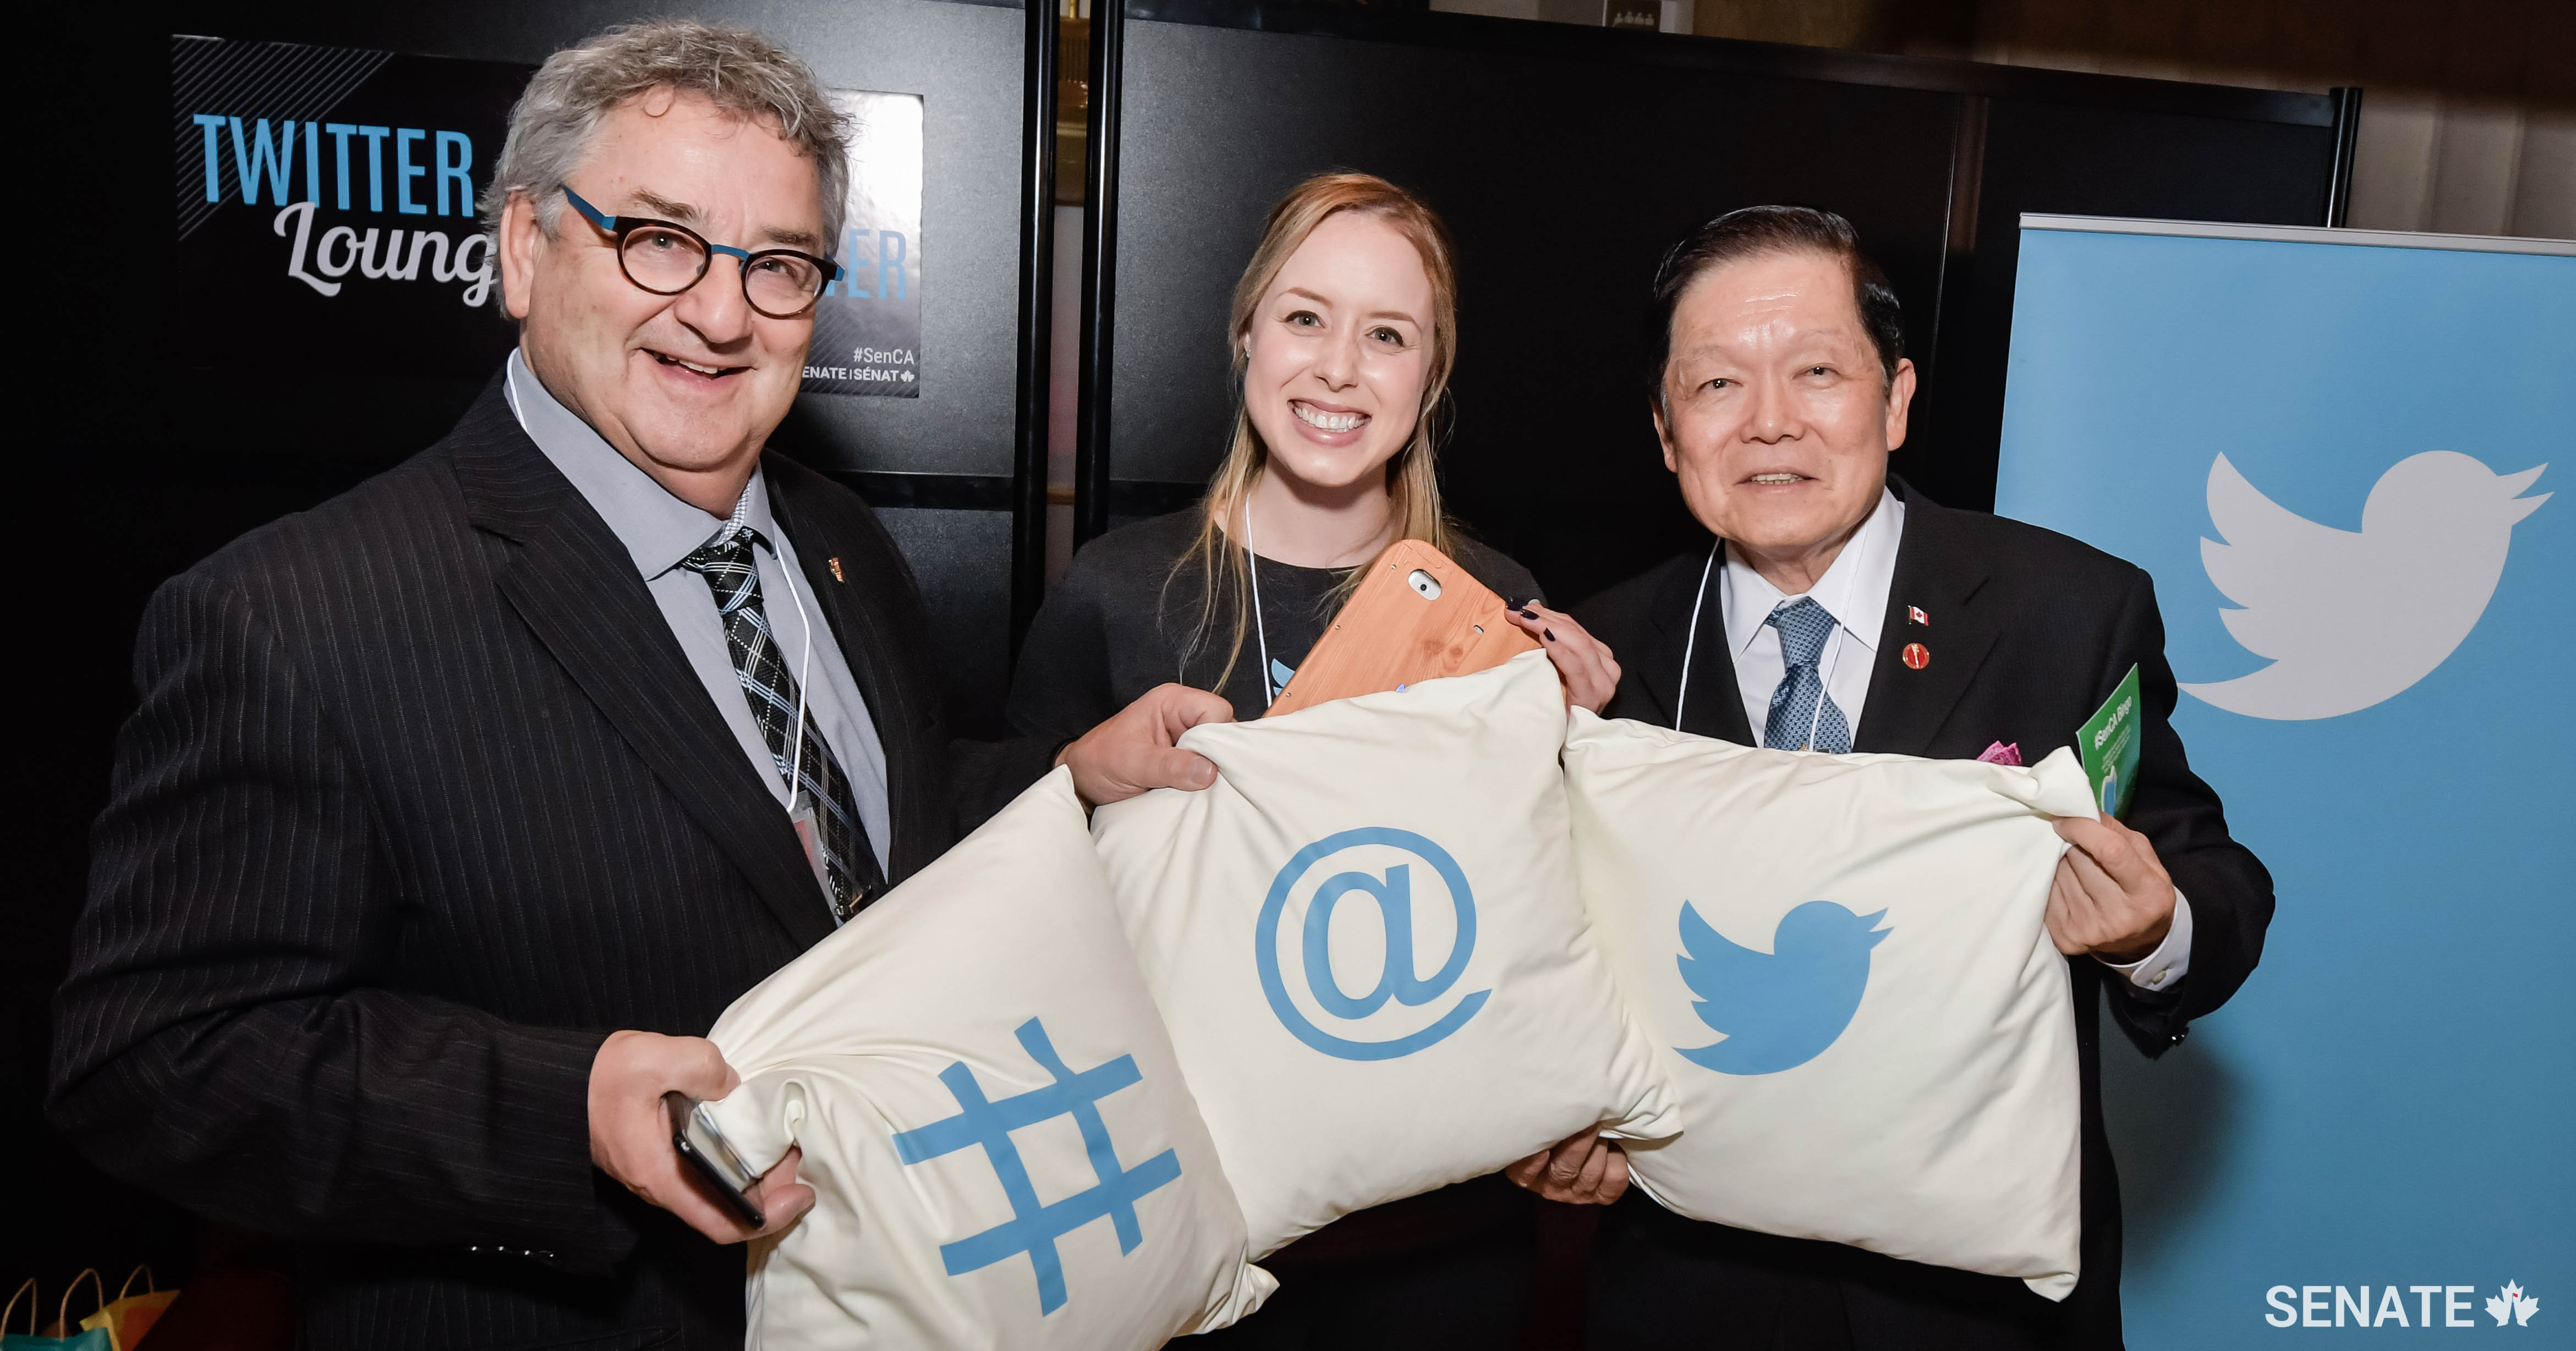 Geneviève Guindon joins Senators Éric Forest (left) and Victor Oh in a shout out to event co-host Twitter Canada